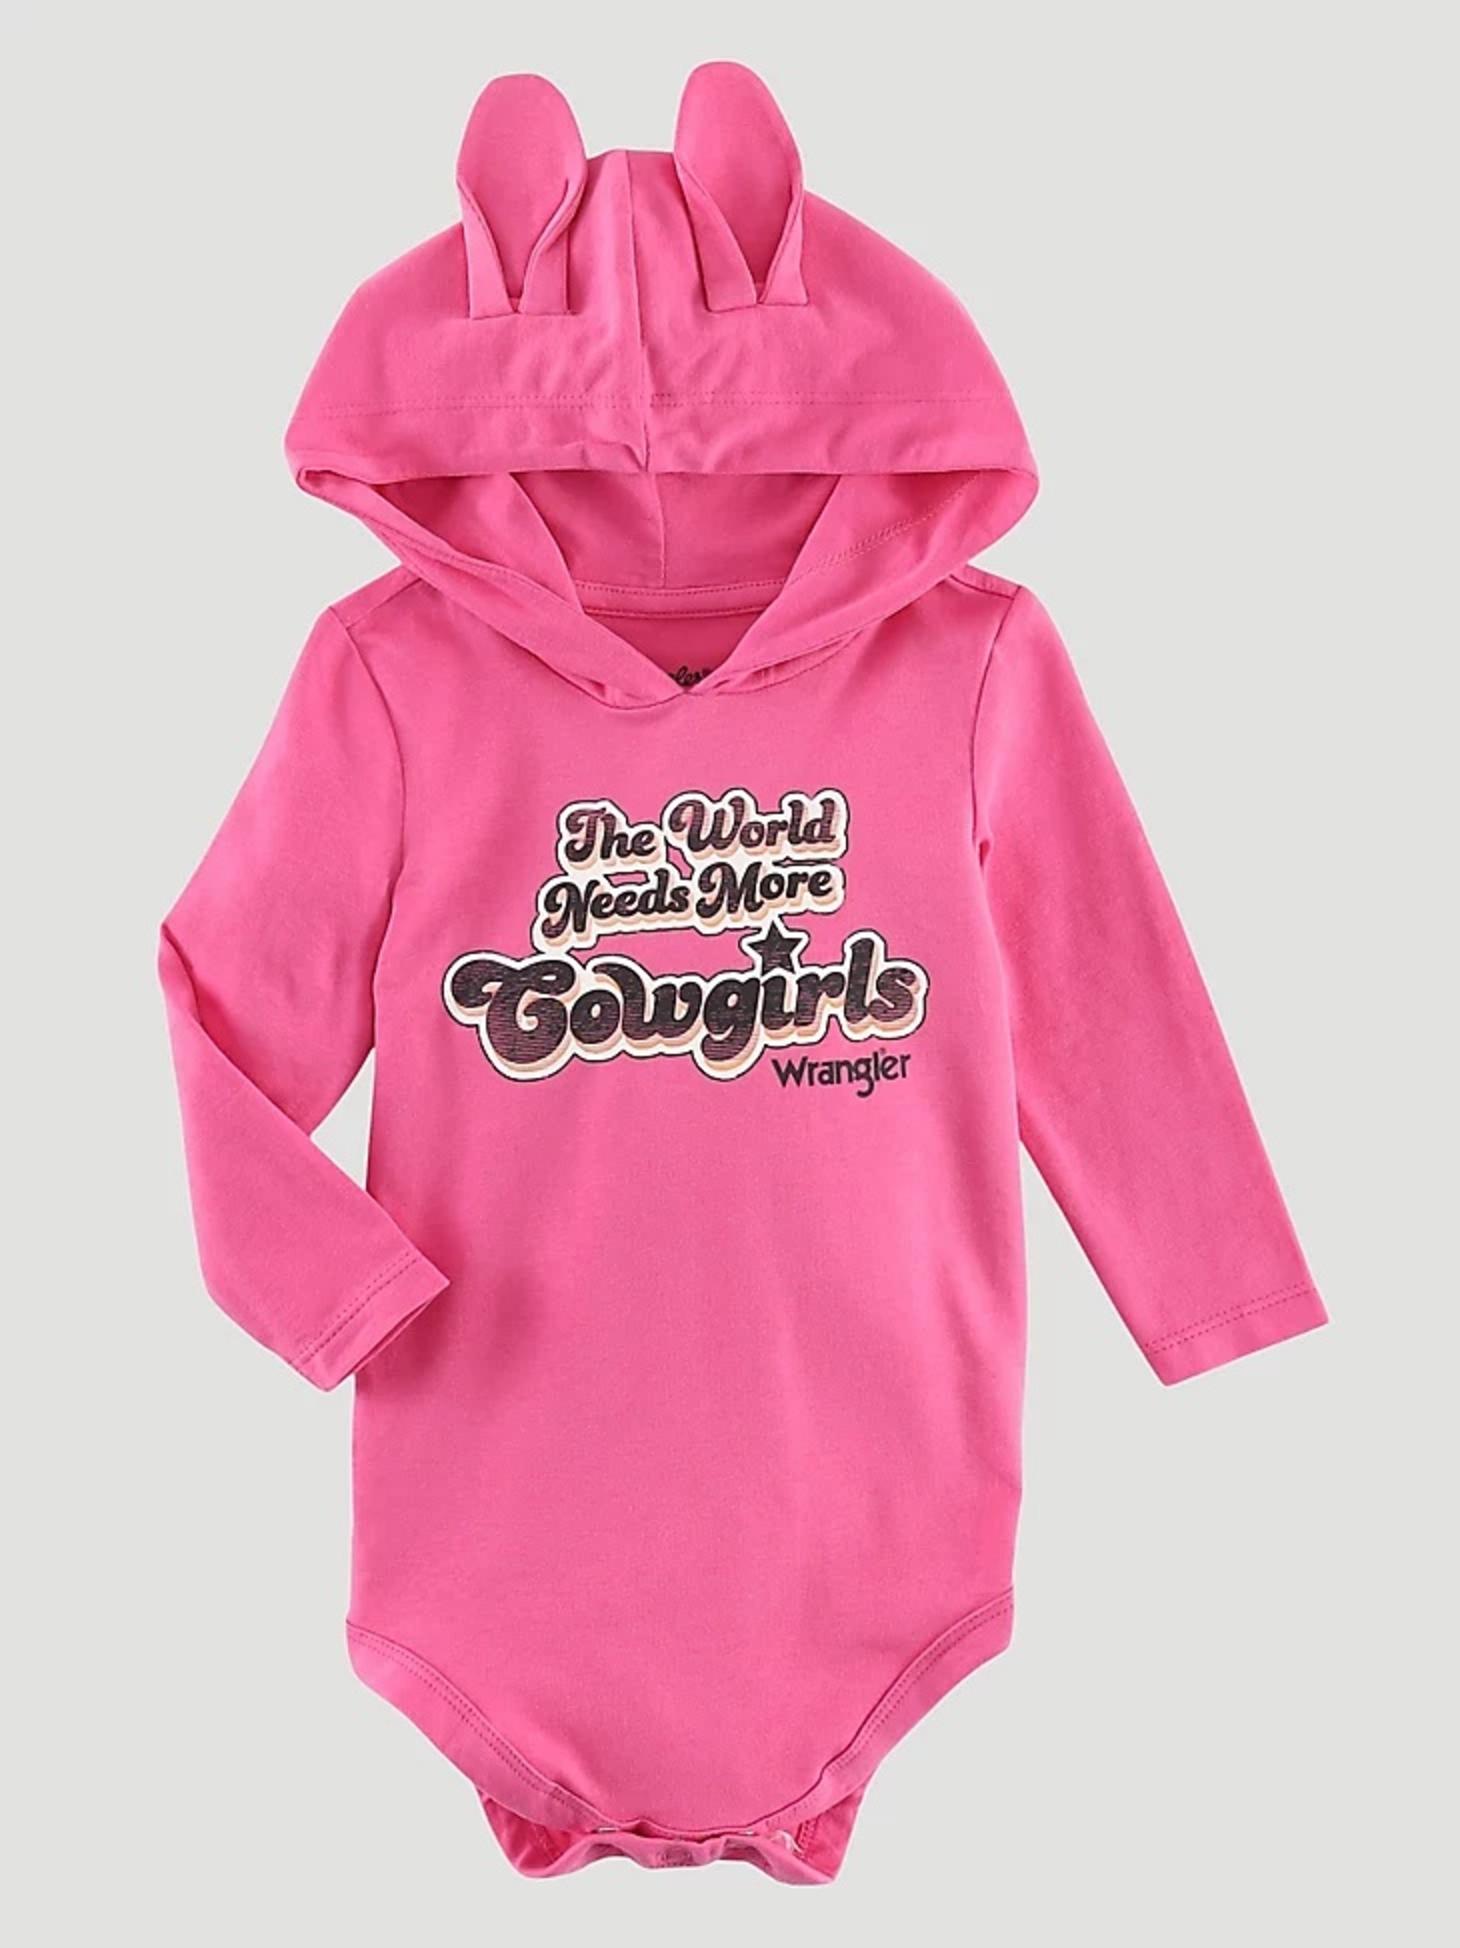 Baby Girl's Cowgirls Hooded Bodysuit In Pink